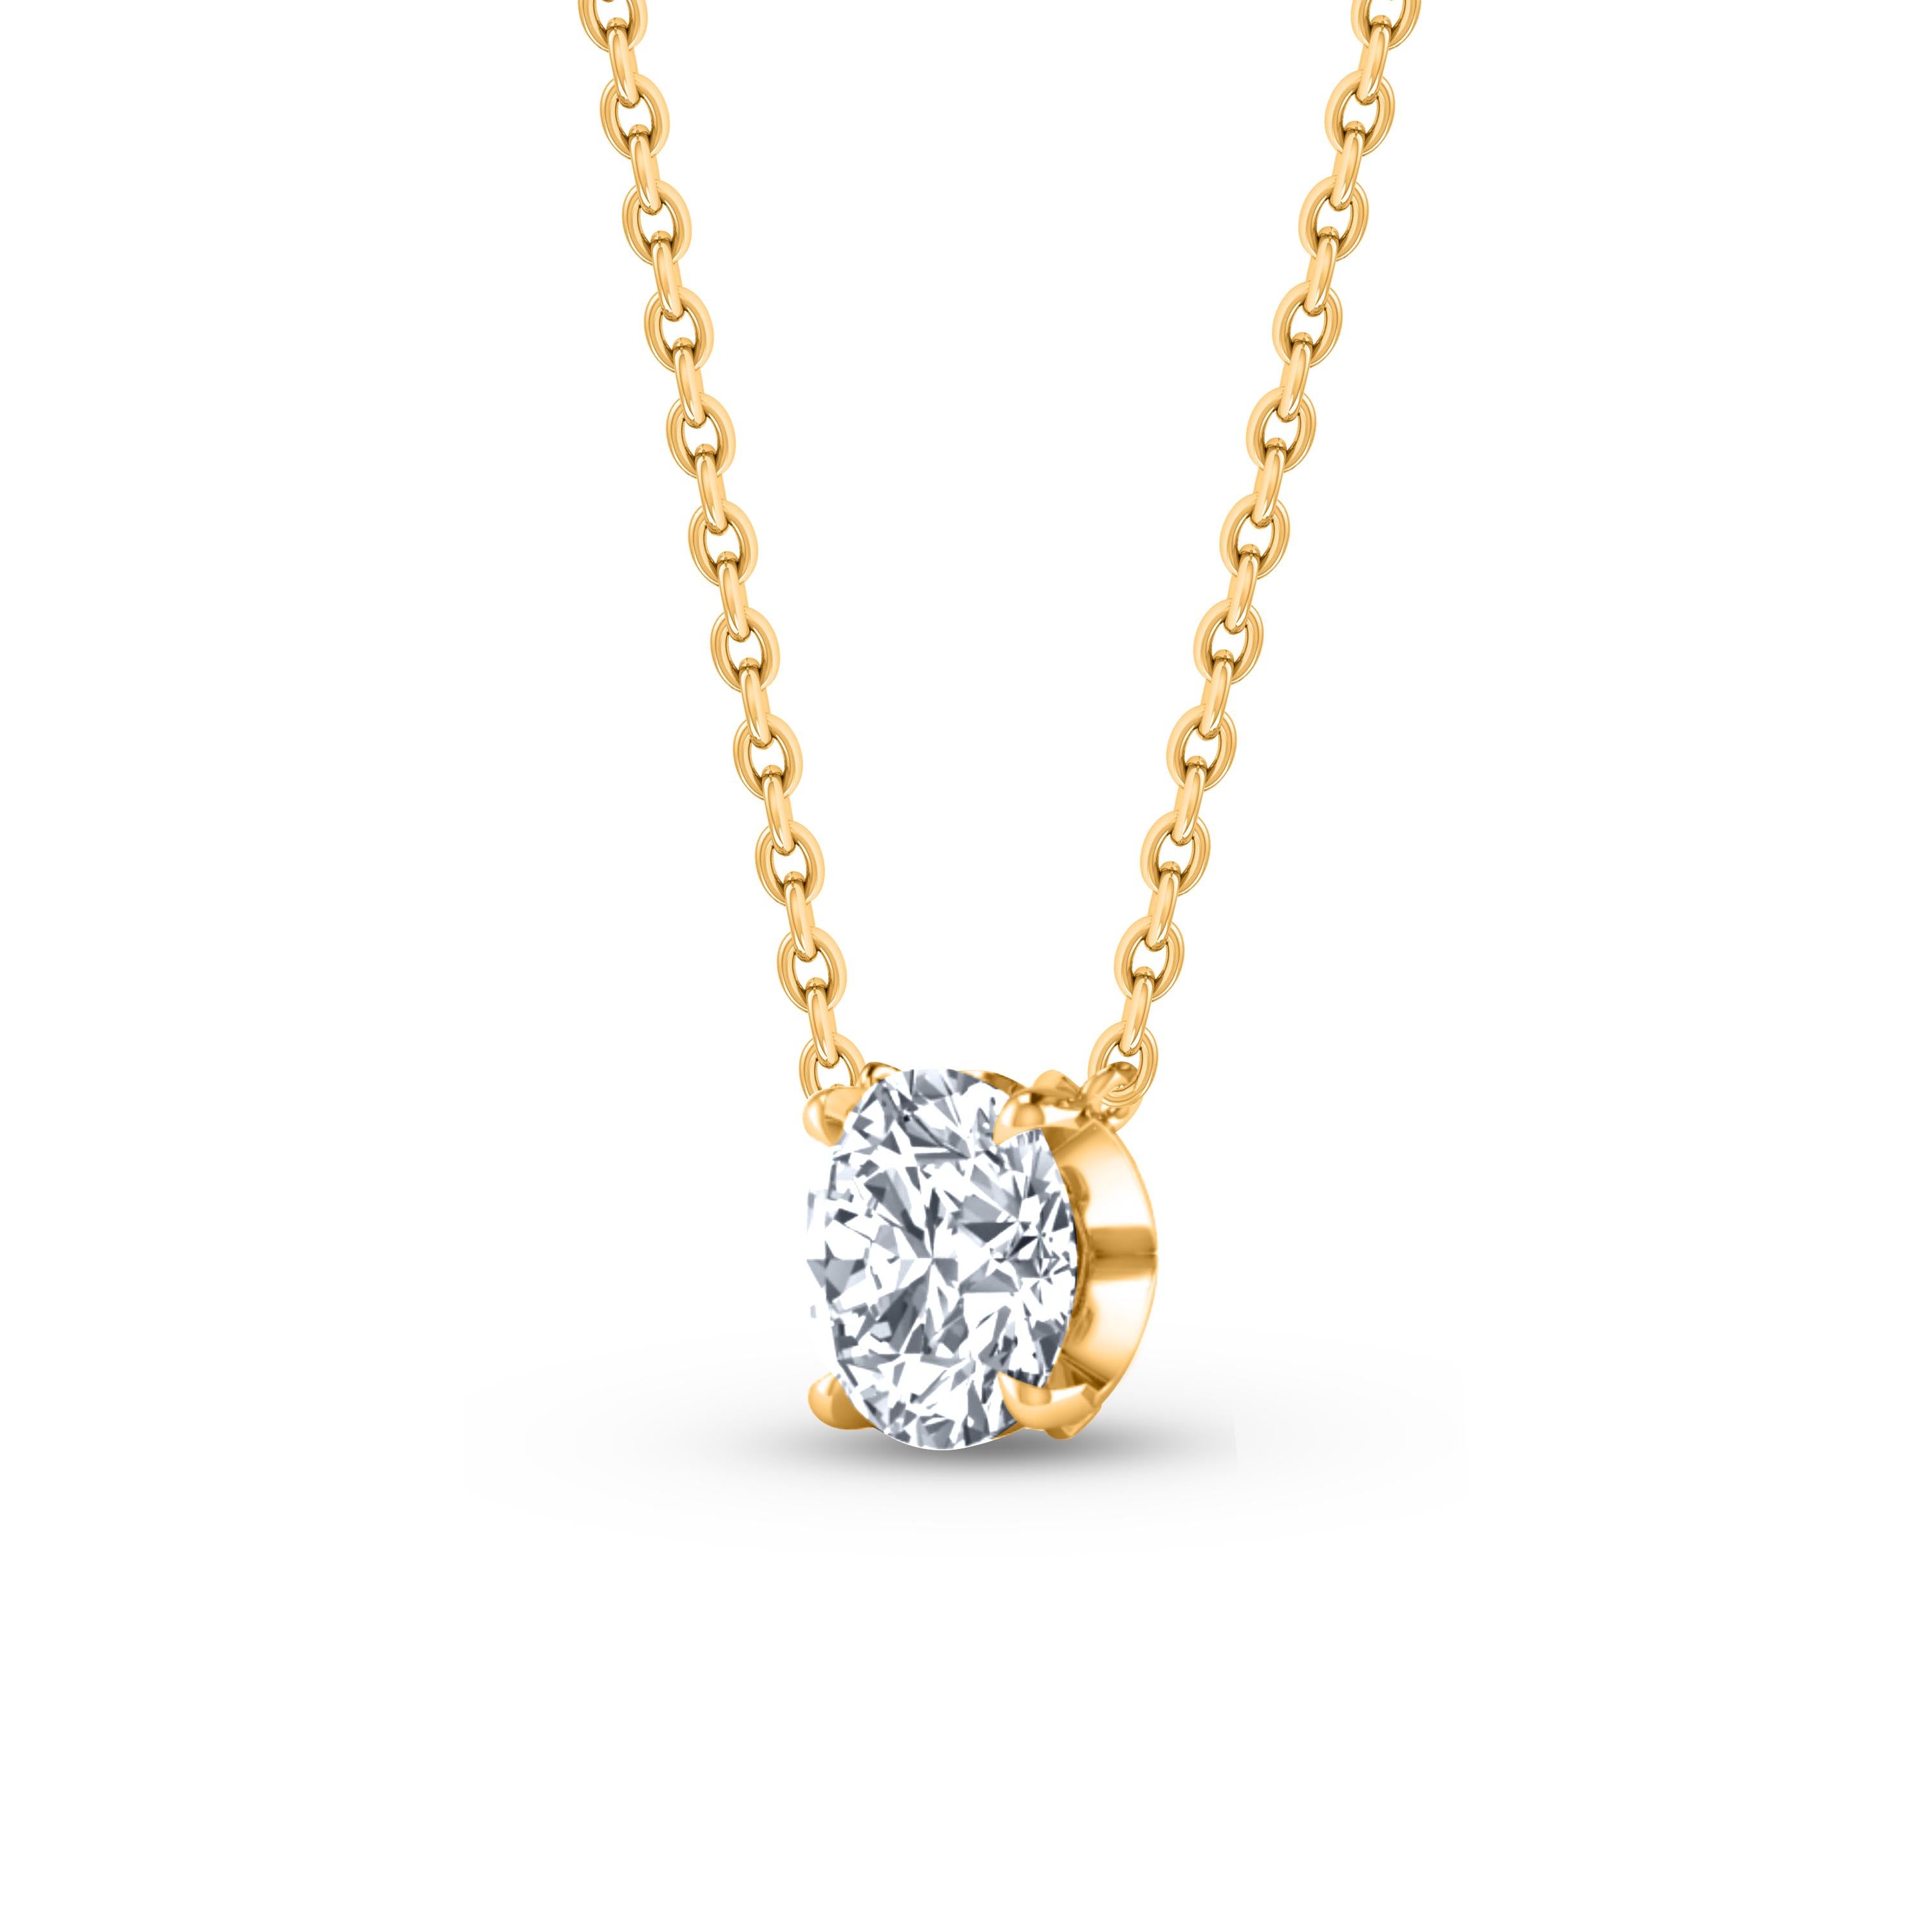  This solitaire diamond necklace features a single, brilliant-cut 0.27 carat diamond in prong setting in 18 KT yellow gold. This elegant necklace includes 20-inch cable chain with extender at 16-inch and 18-inch. This classic necklace will be